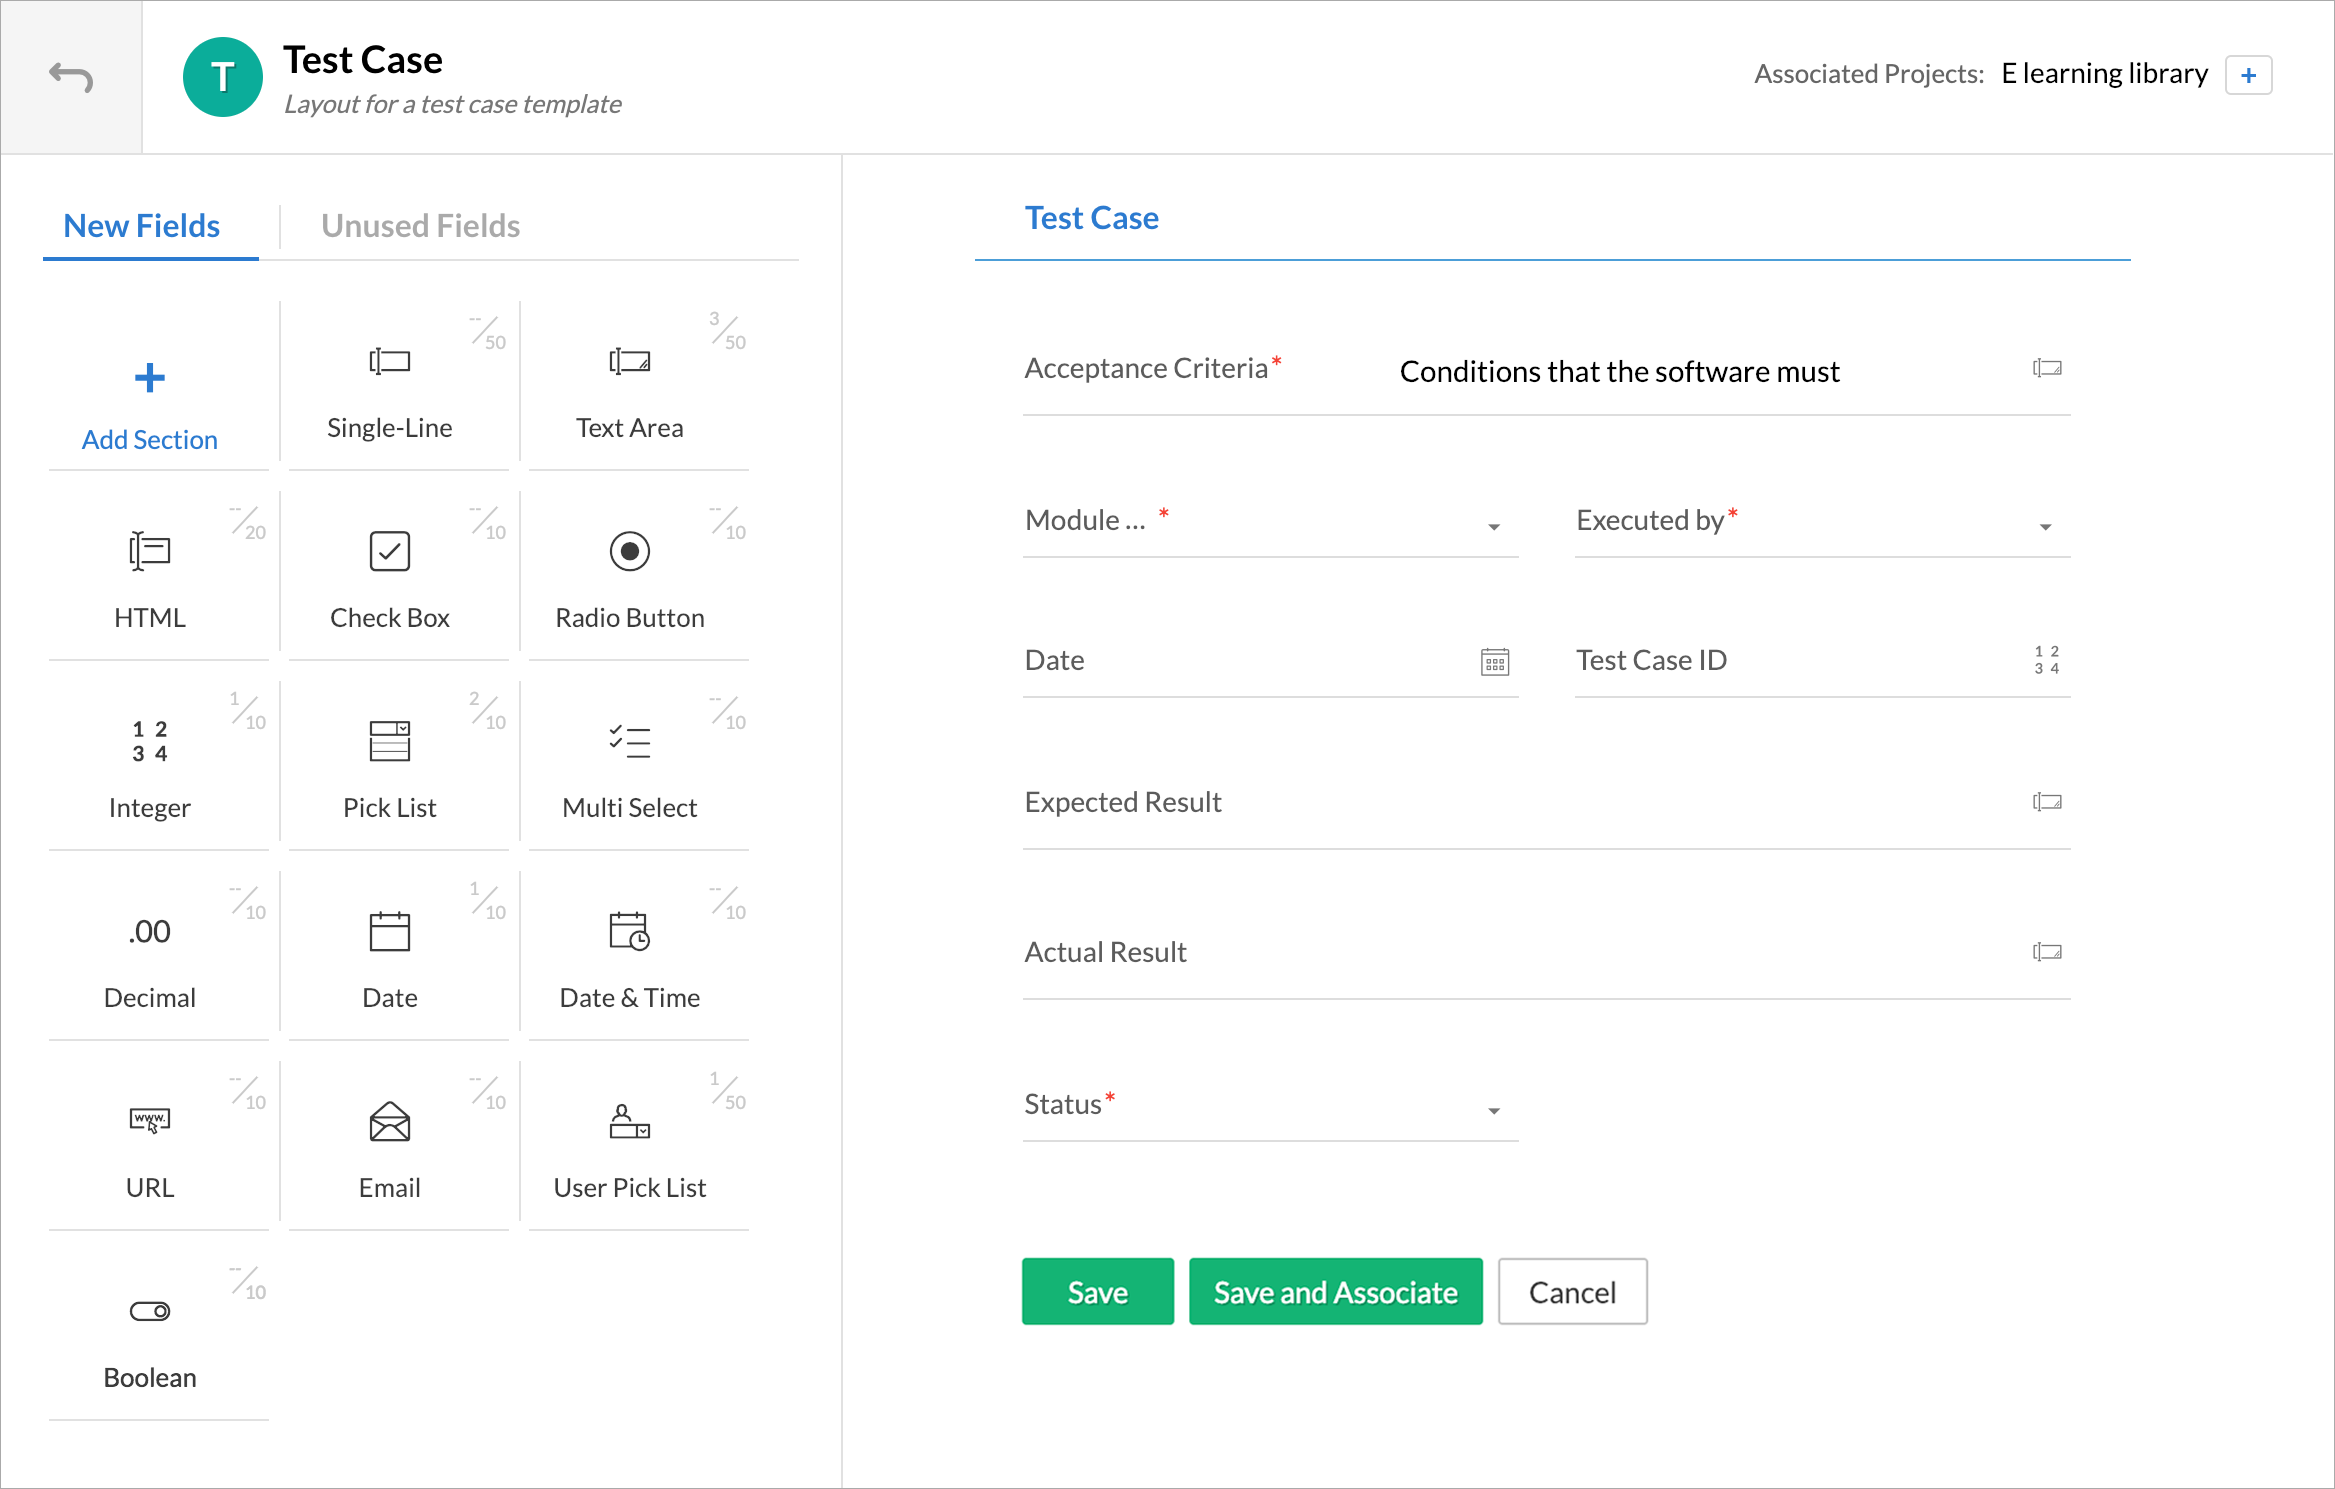 Customize your agile journey—announcing new features in Zoho Sprints